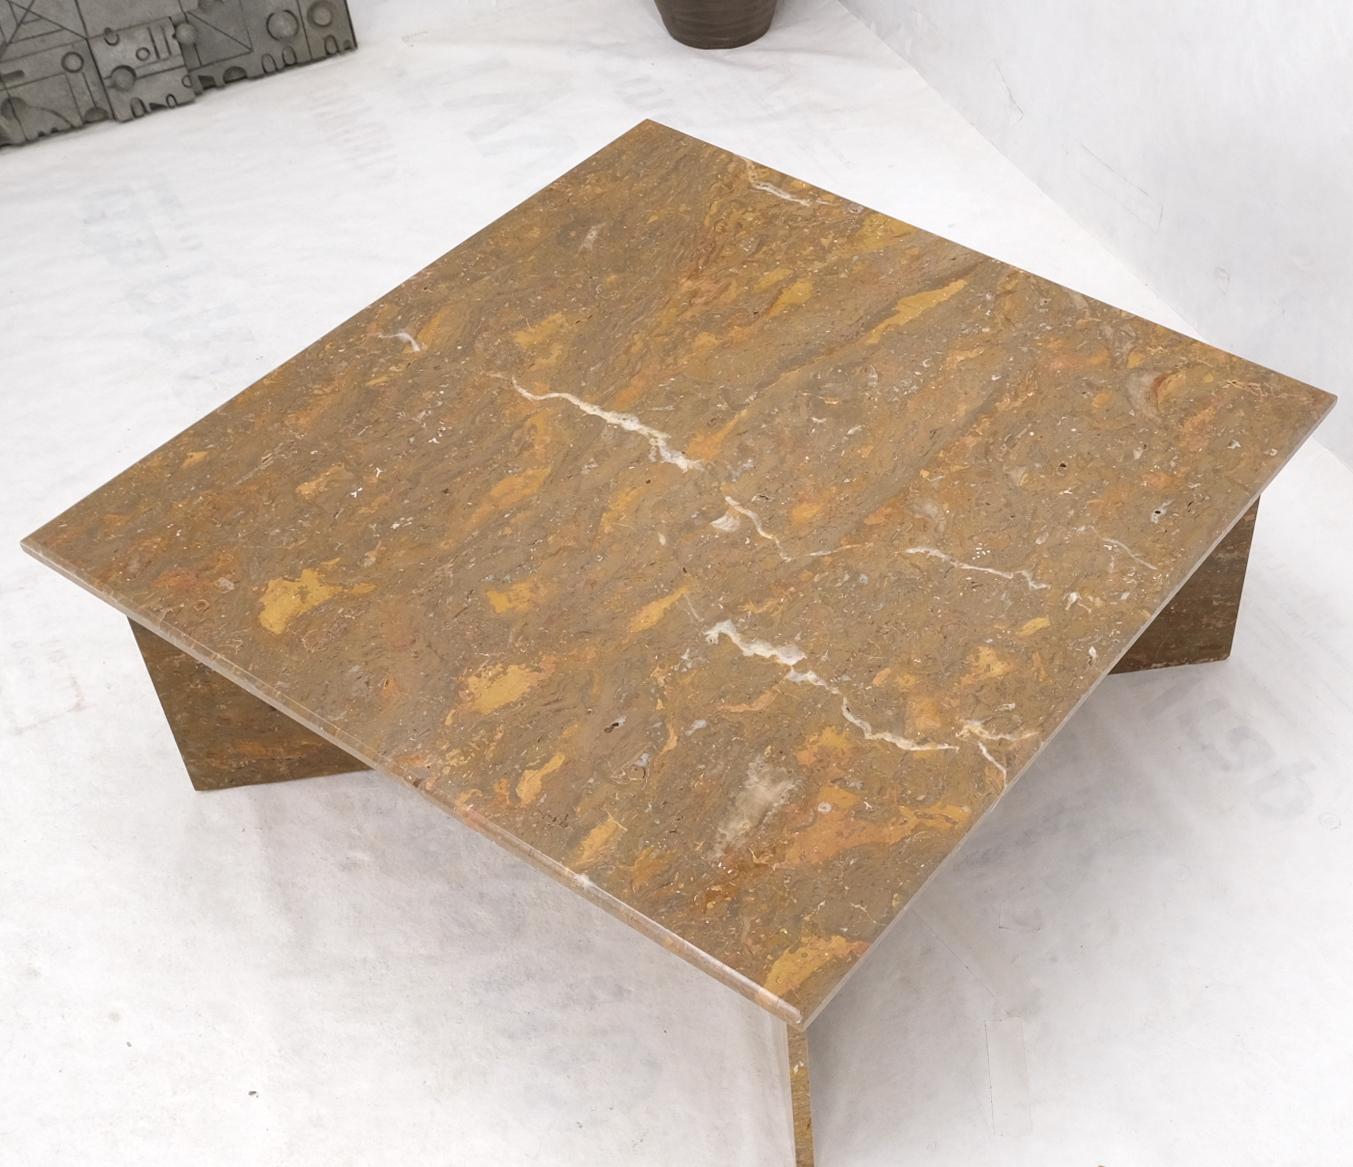 Multicolor Marble X Base Square Marble Coffee Table In Excellent Condition For Sale In Rockaway, NJ